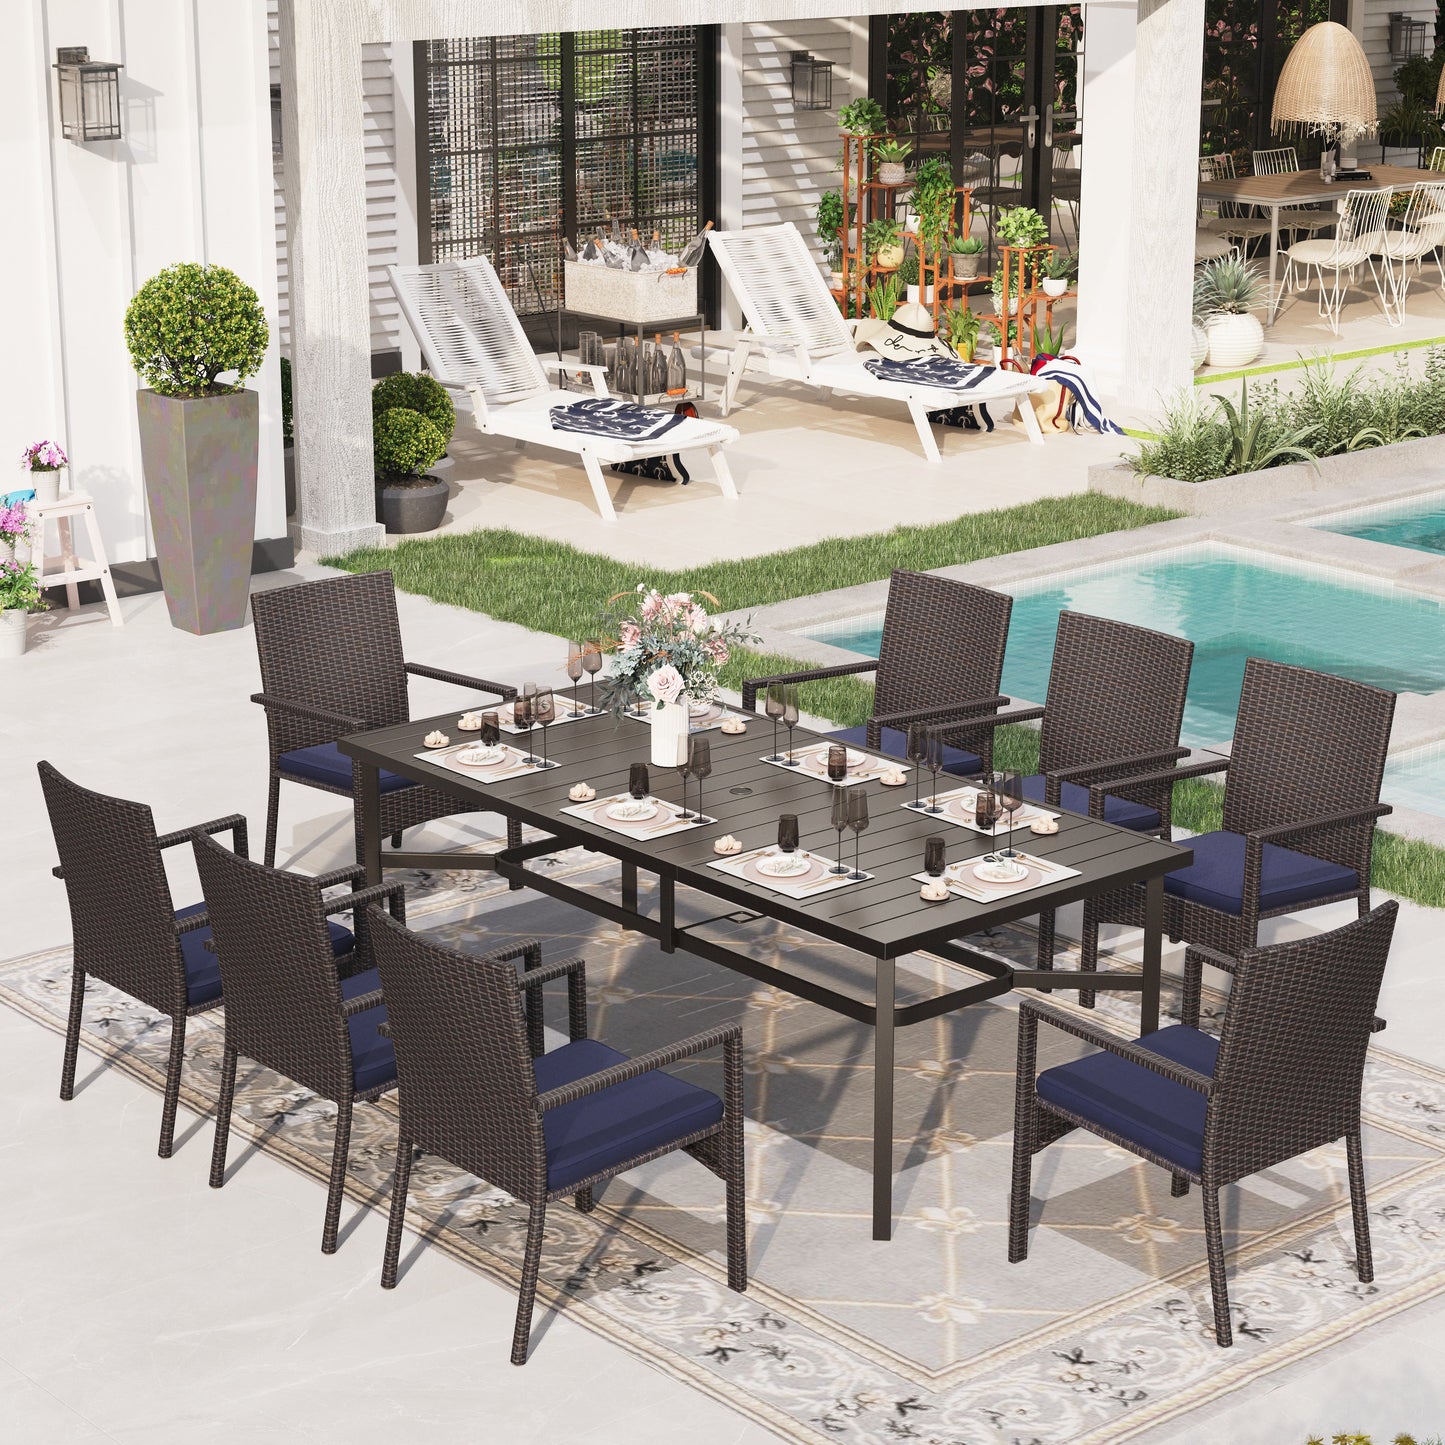 Sophia & William 9-Piece Outdoor Patio Dining Set with 1Pc Rectangular Metal Table and 8Pcs Rattan Chairs, Black & Navy Blue